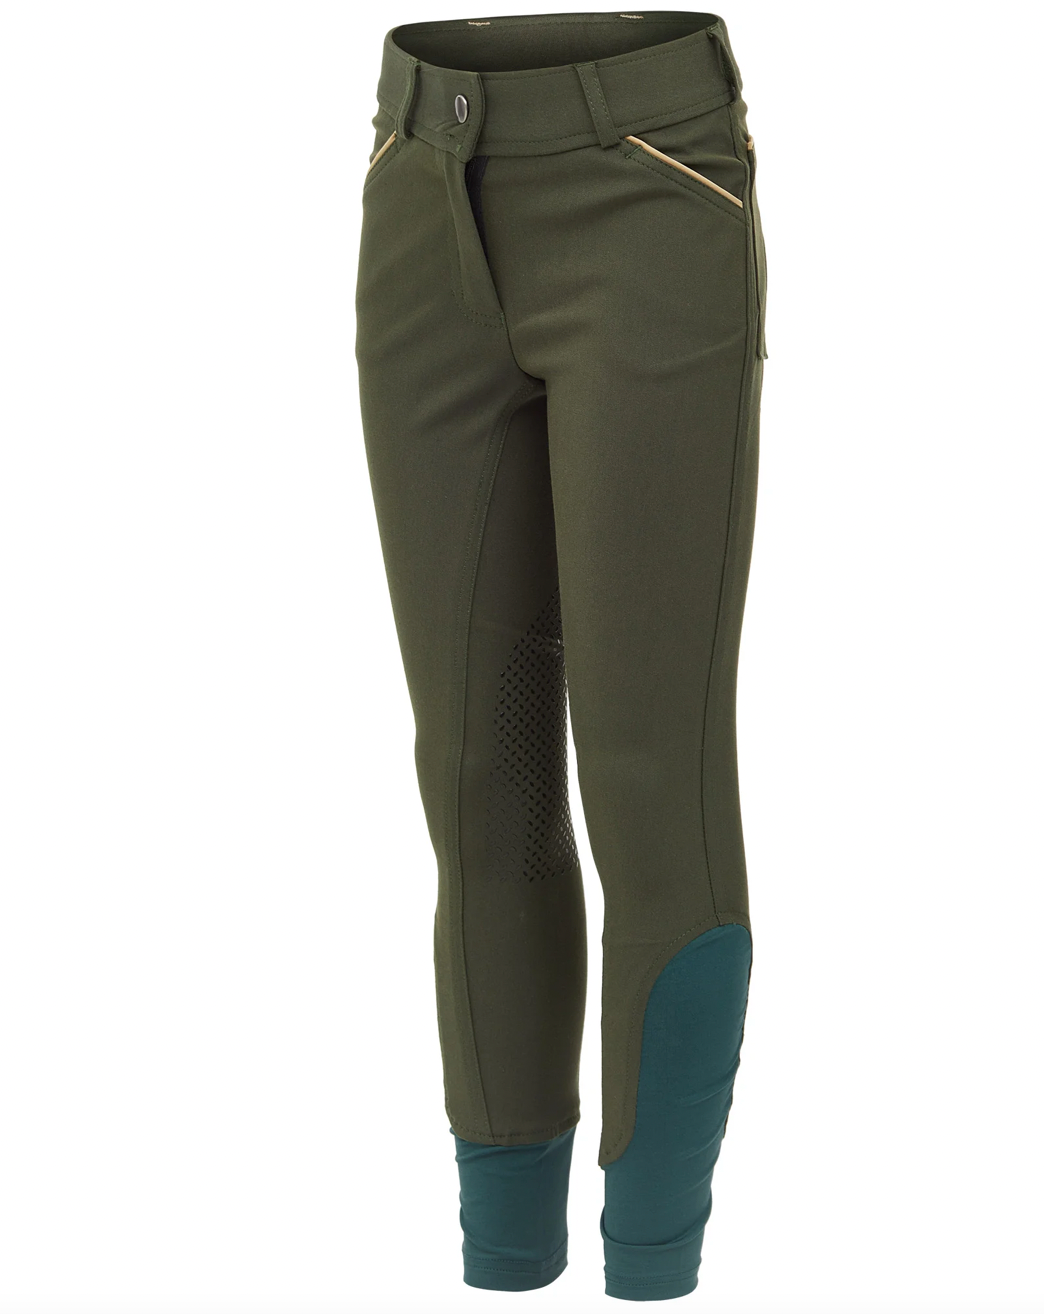 RH Kids Silicone Knee Patch Breeches - Hunter Green